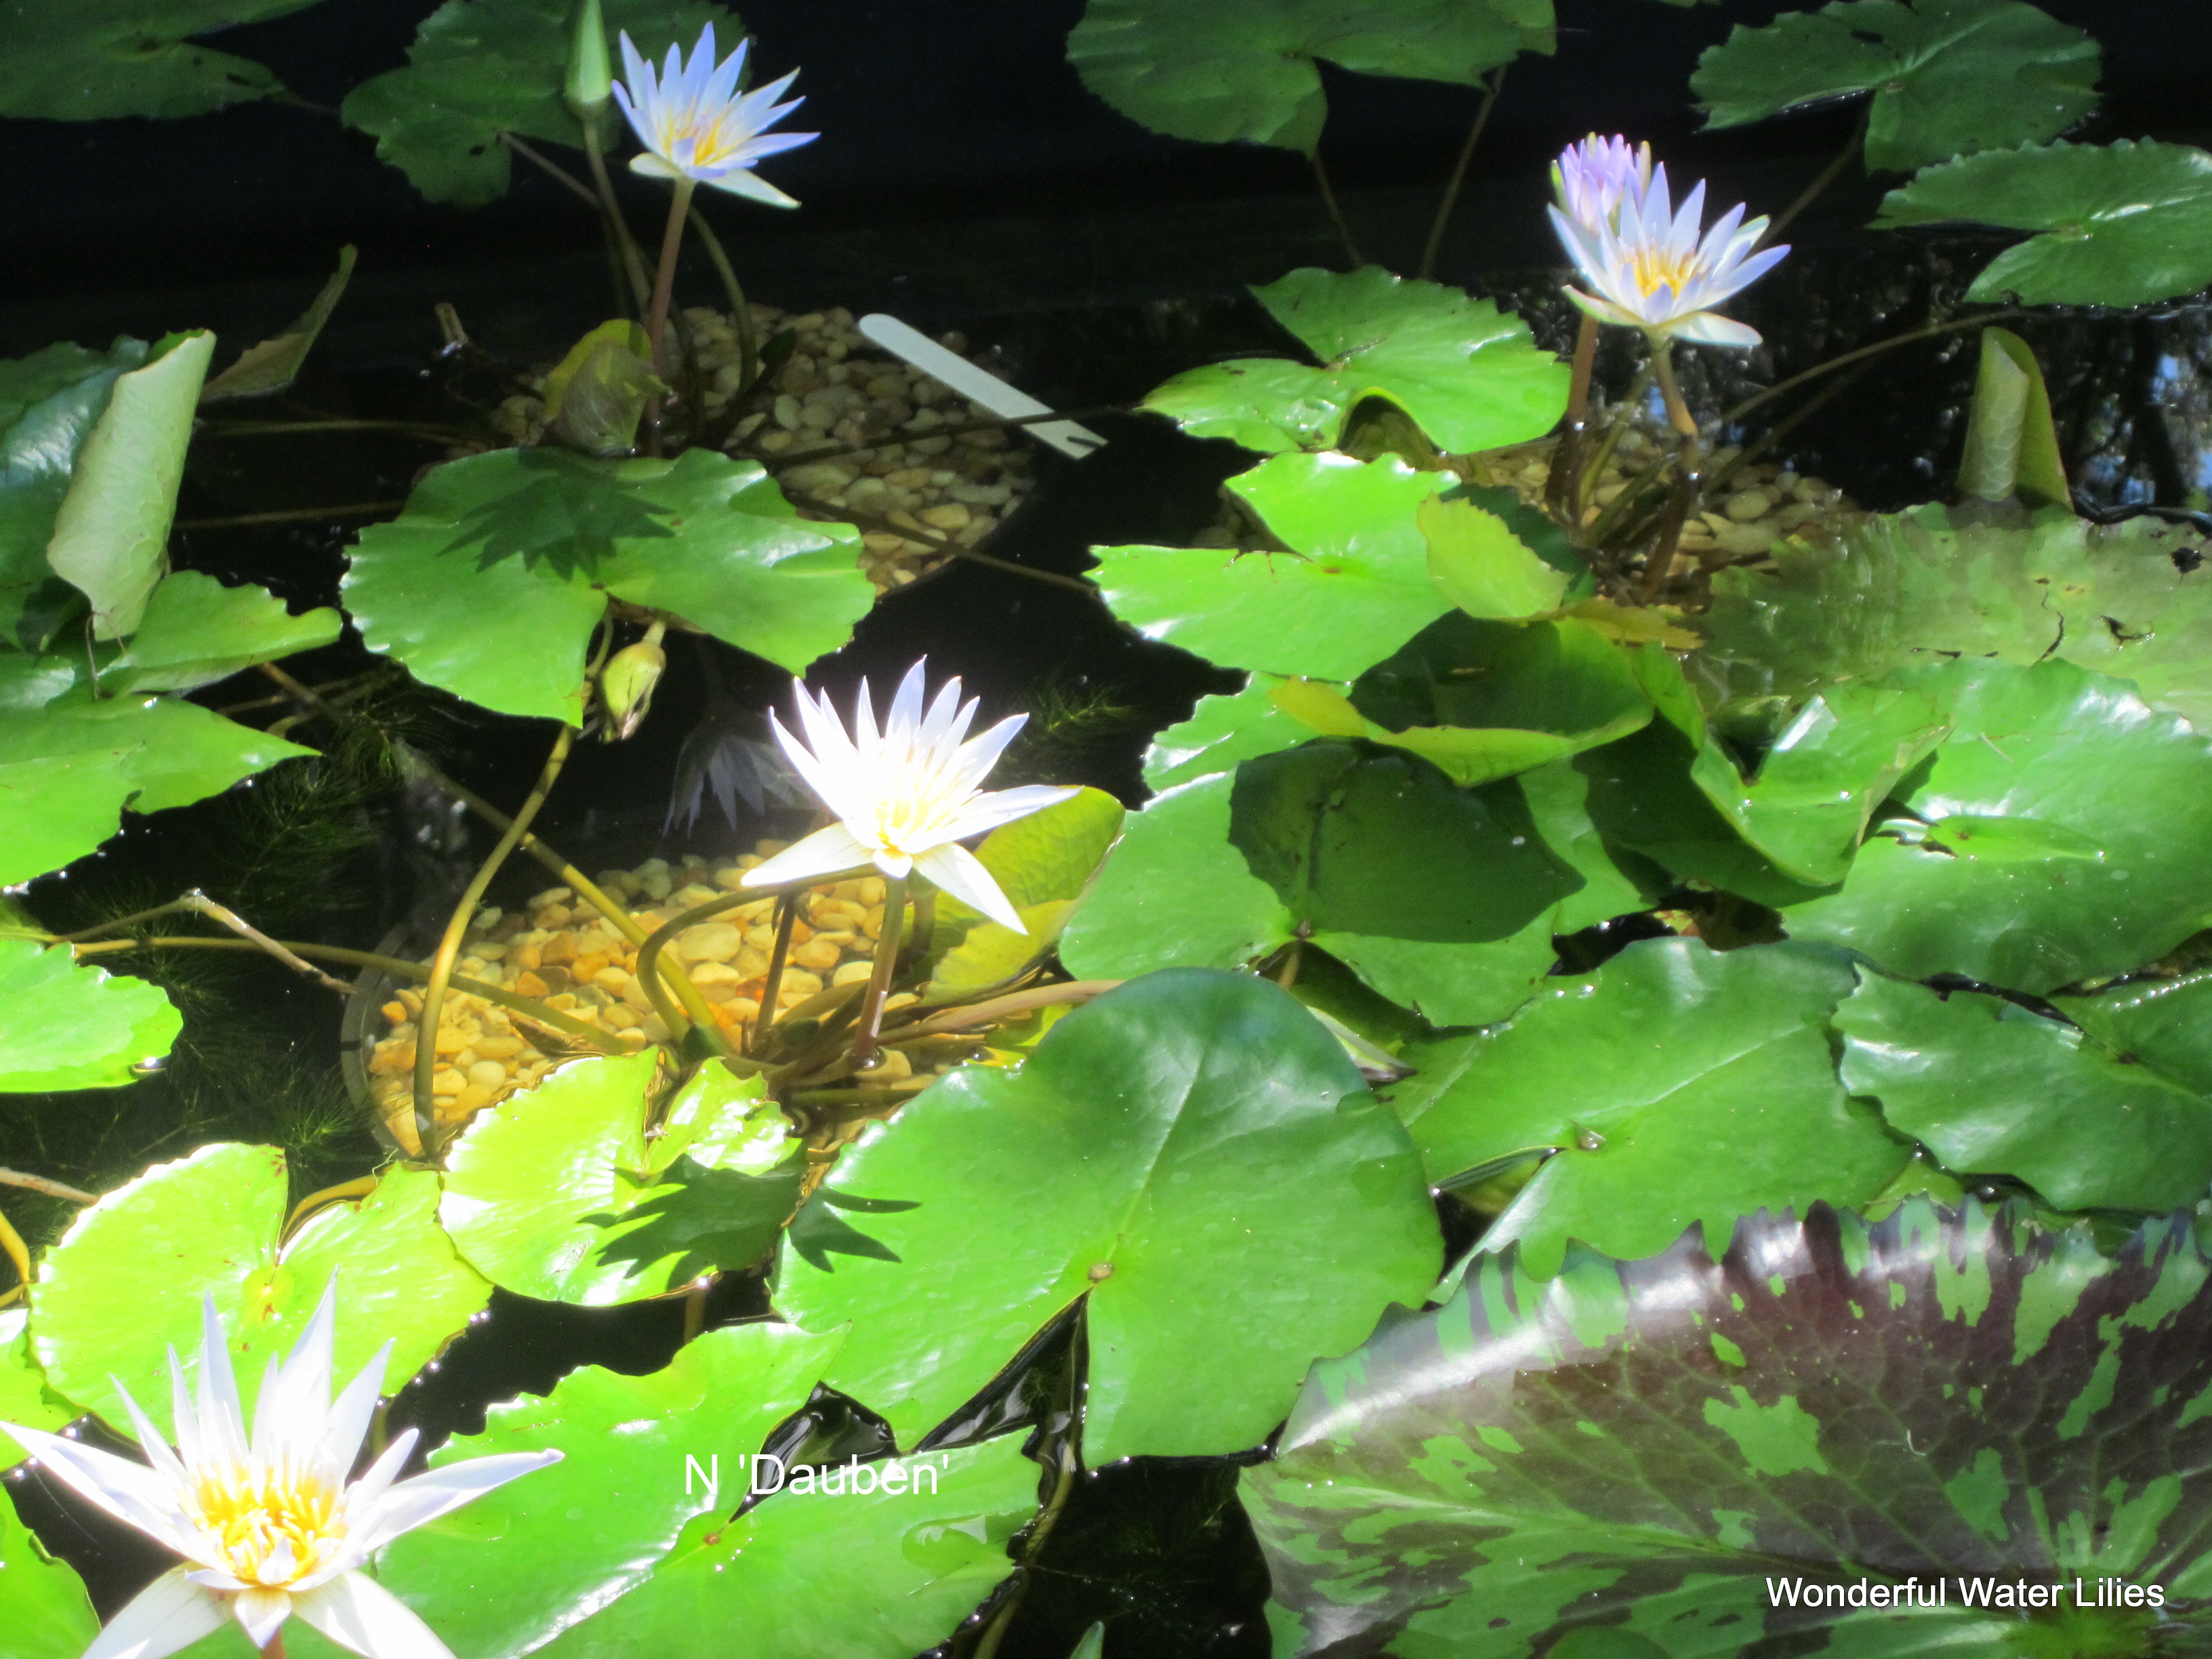 Wonderful Water Lilies - Tropical Blue and Purple Water Lilies